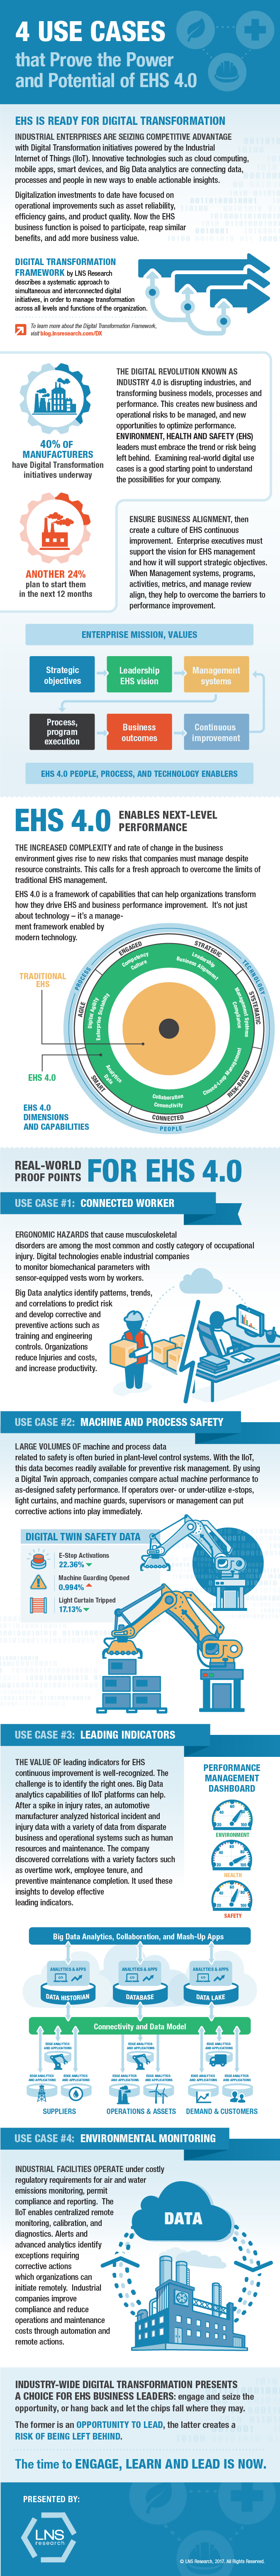 4 Use Cases That Prove the Power and Potential of EHS 4.0